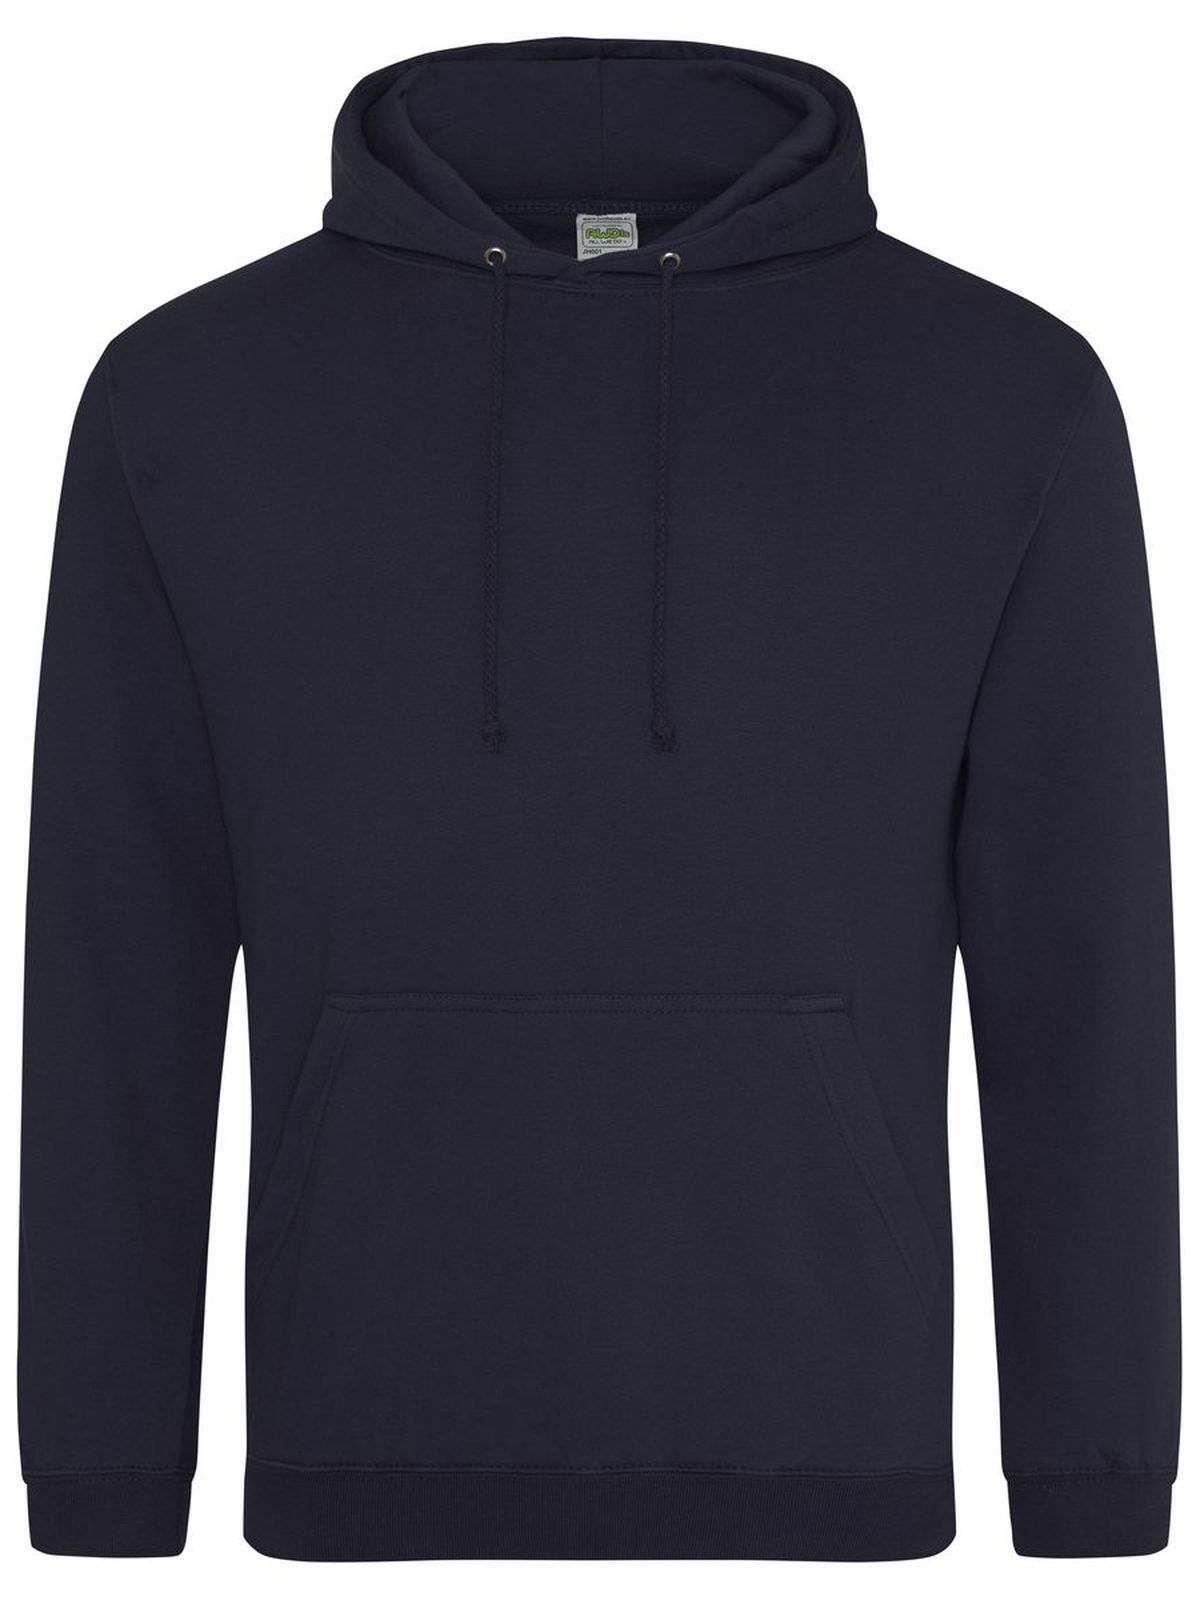 college-hoodie-new-french-navy.webp